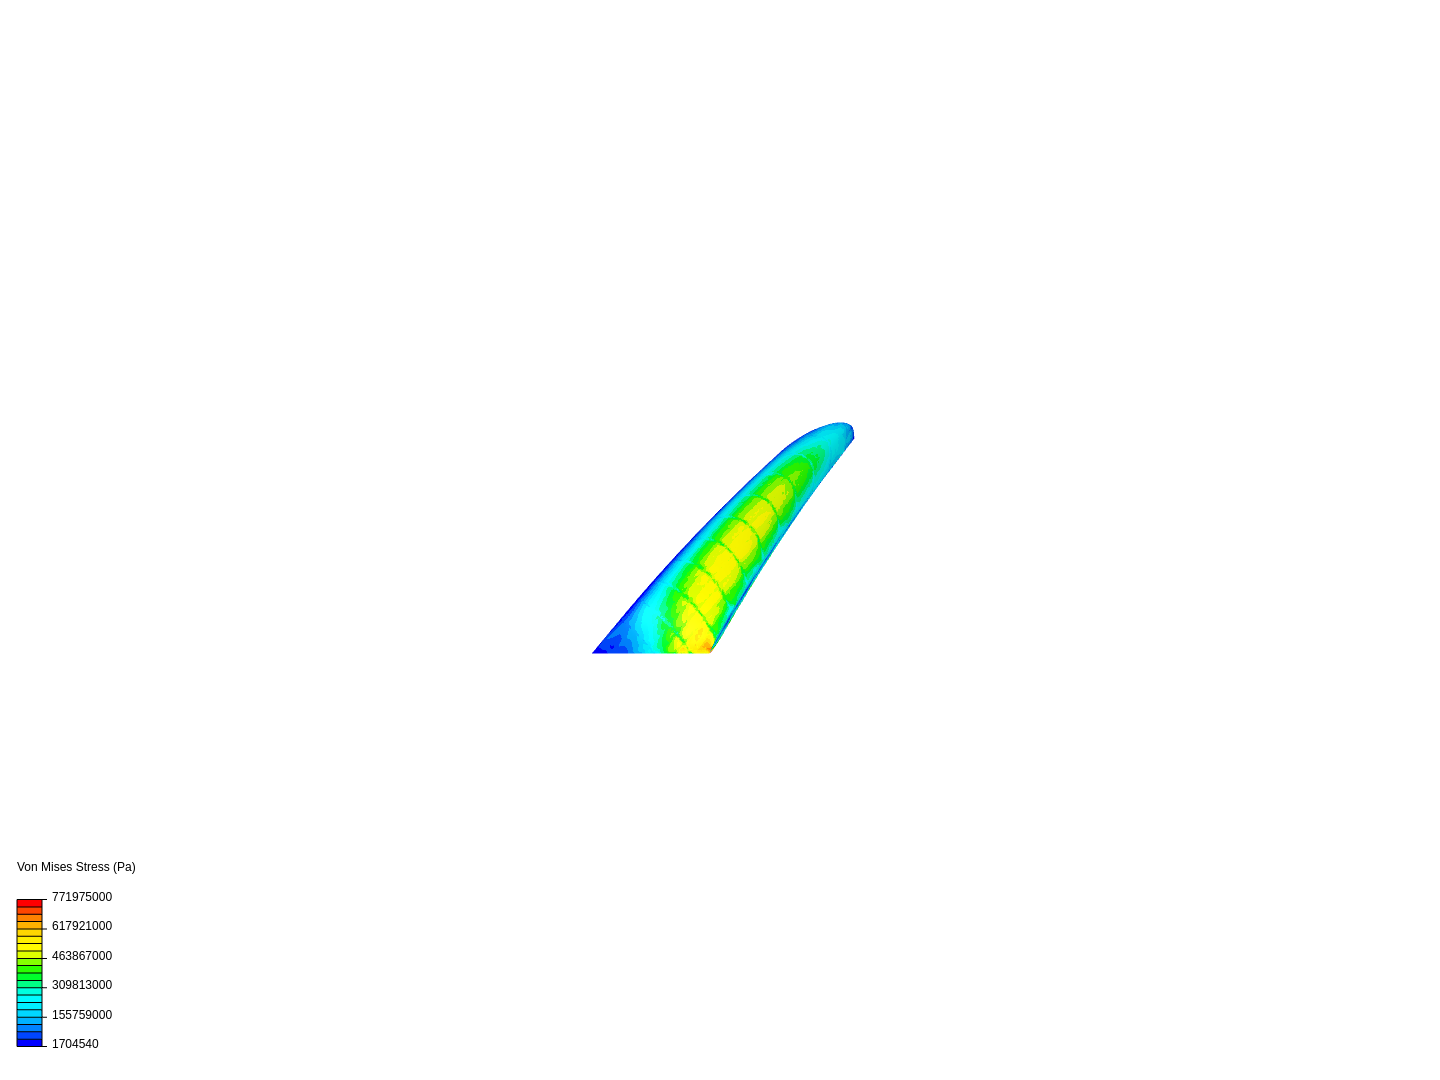 rc_wing_fea_1 image